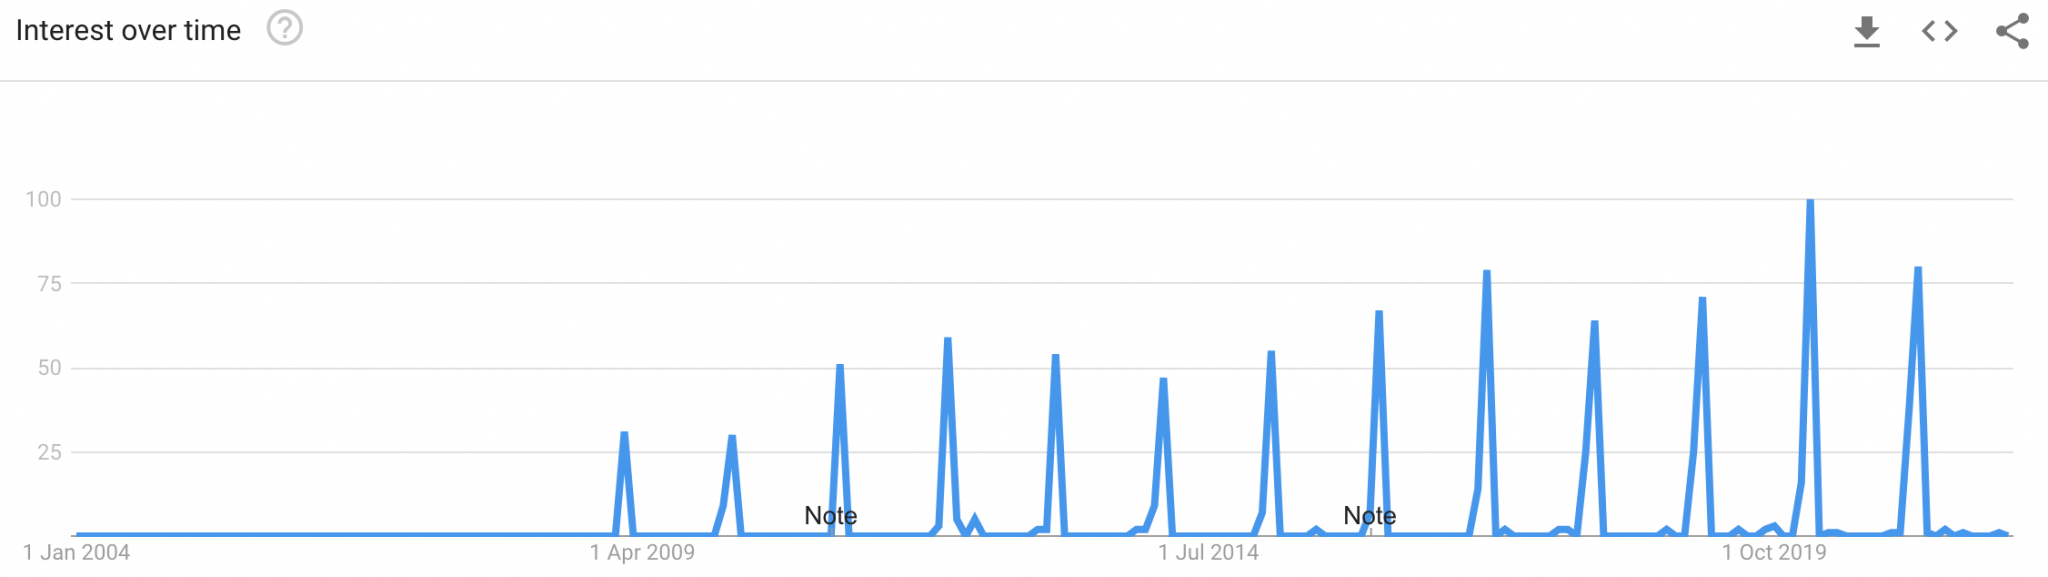 Google Trends Valentine's Day Gifts Trend